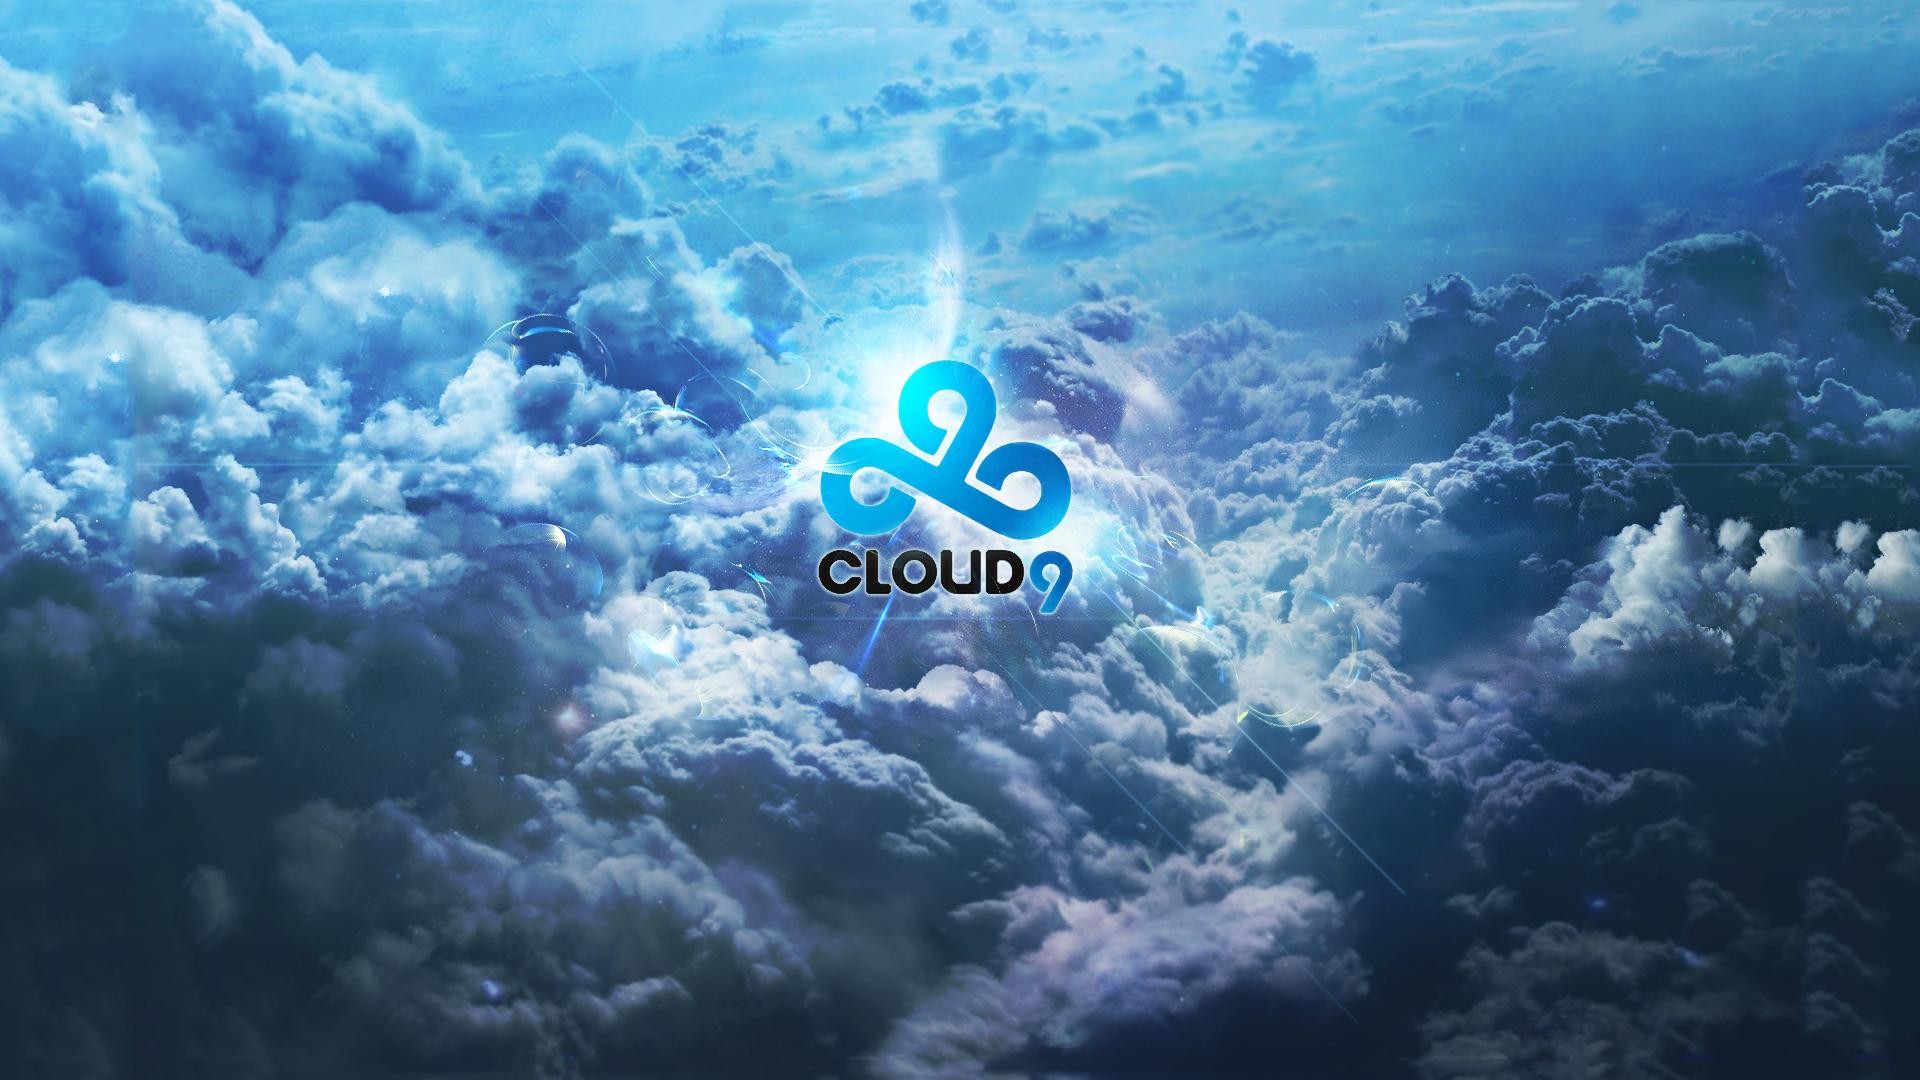 Video Games Counter Strike Global Offensive Cloud9 Video Games Clouds 1920x1080